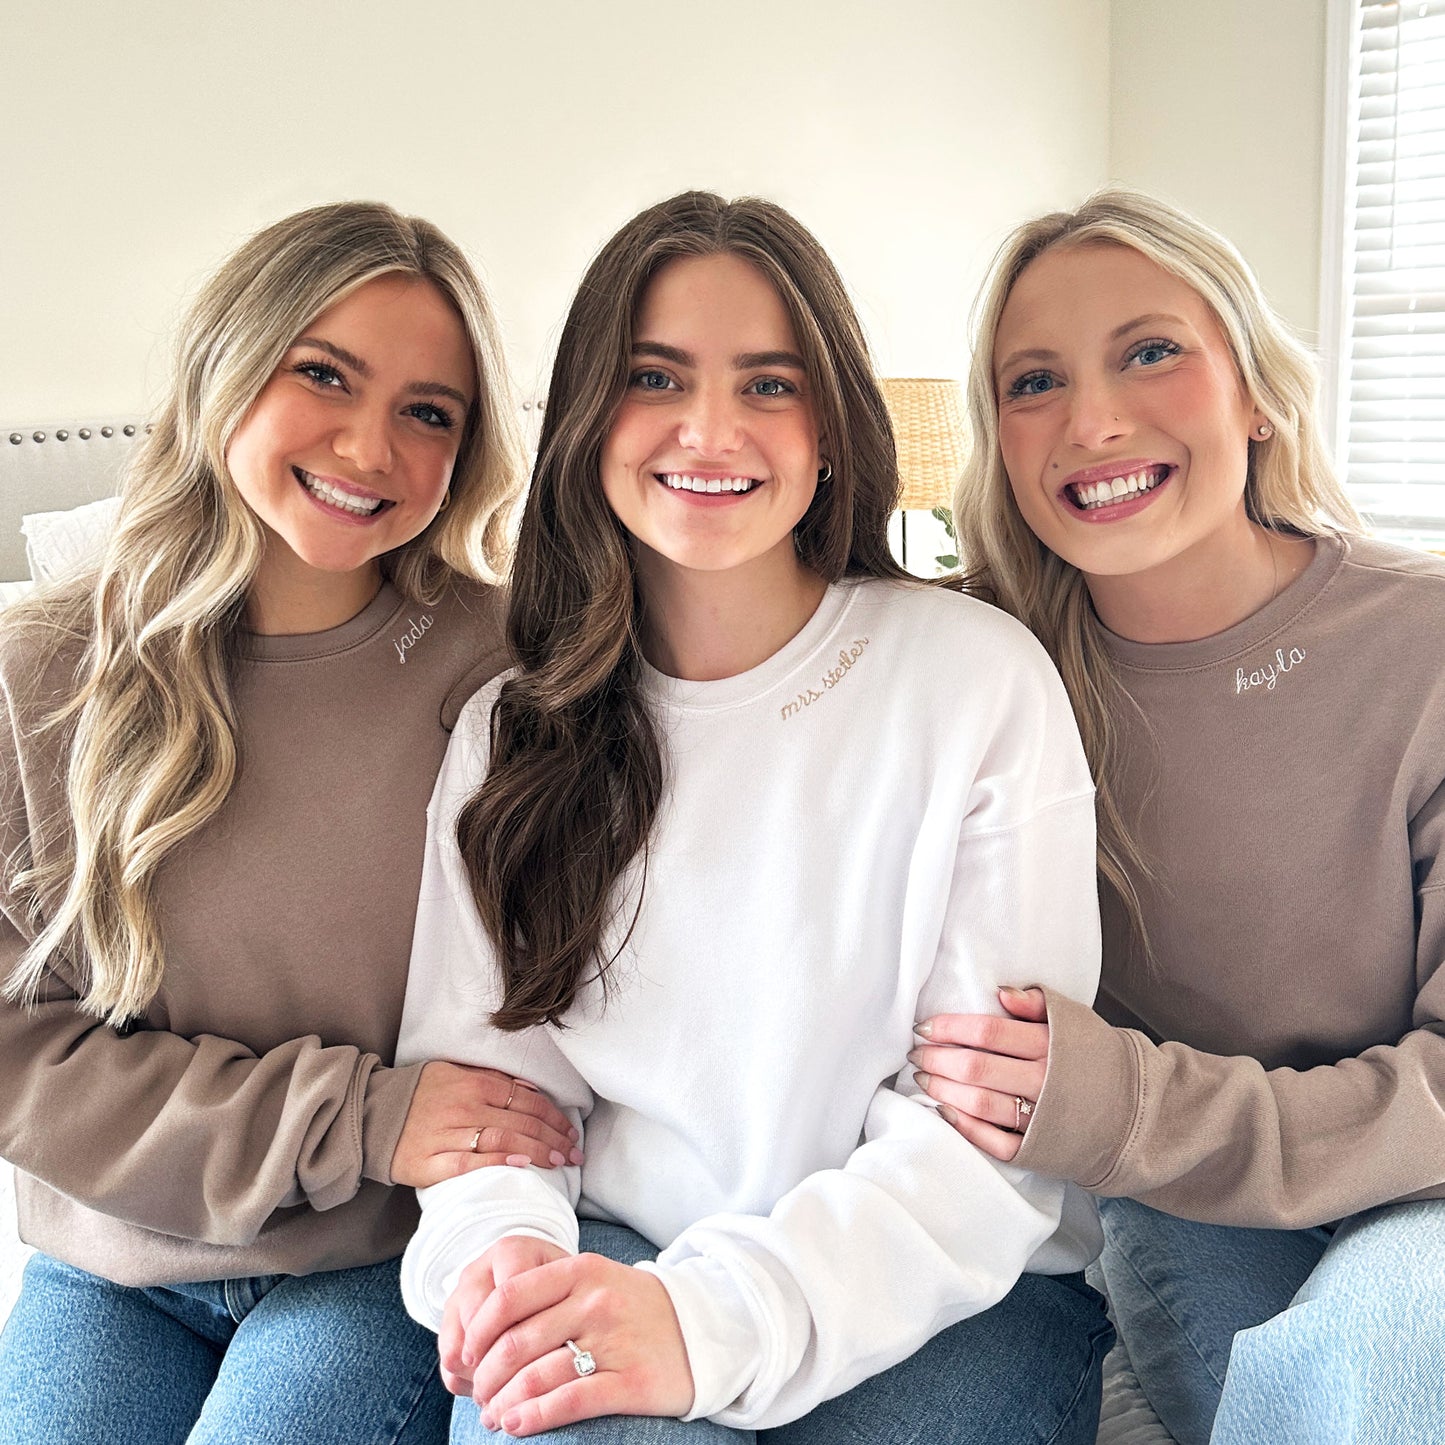 3 young women wearing crewneck sweatshirts for a bridal photo. The bride is wearing a white crewneck sweatshirt with custom name embroidered in camel thread on the neckline. the bridesmaids are wearing a tan crewneck sweatshirt with names embroidered in white on the neckline 